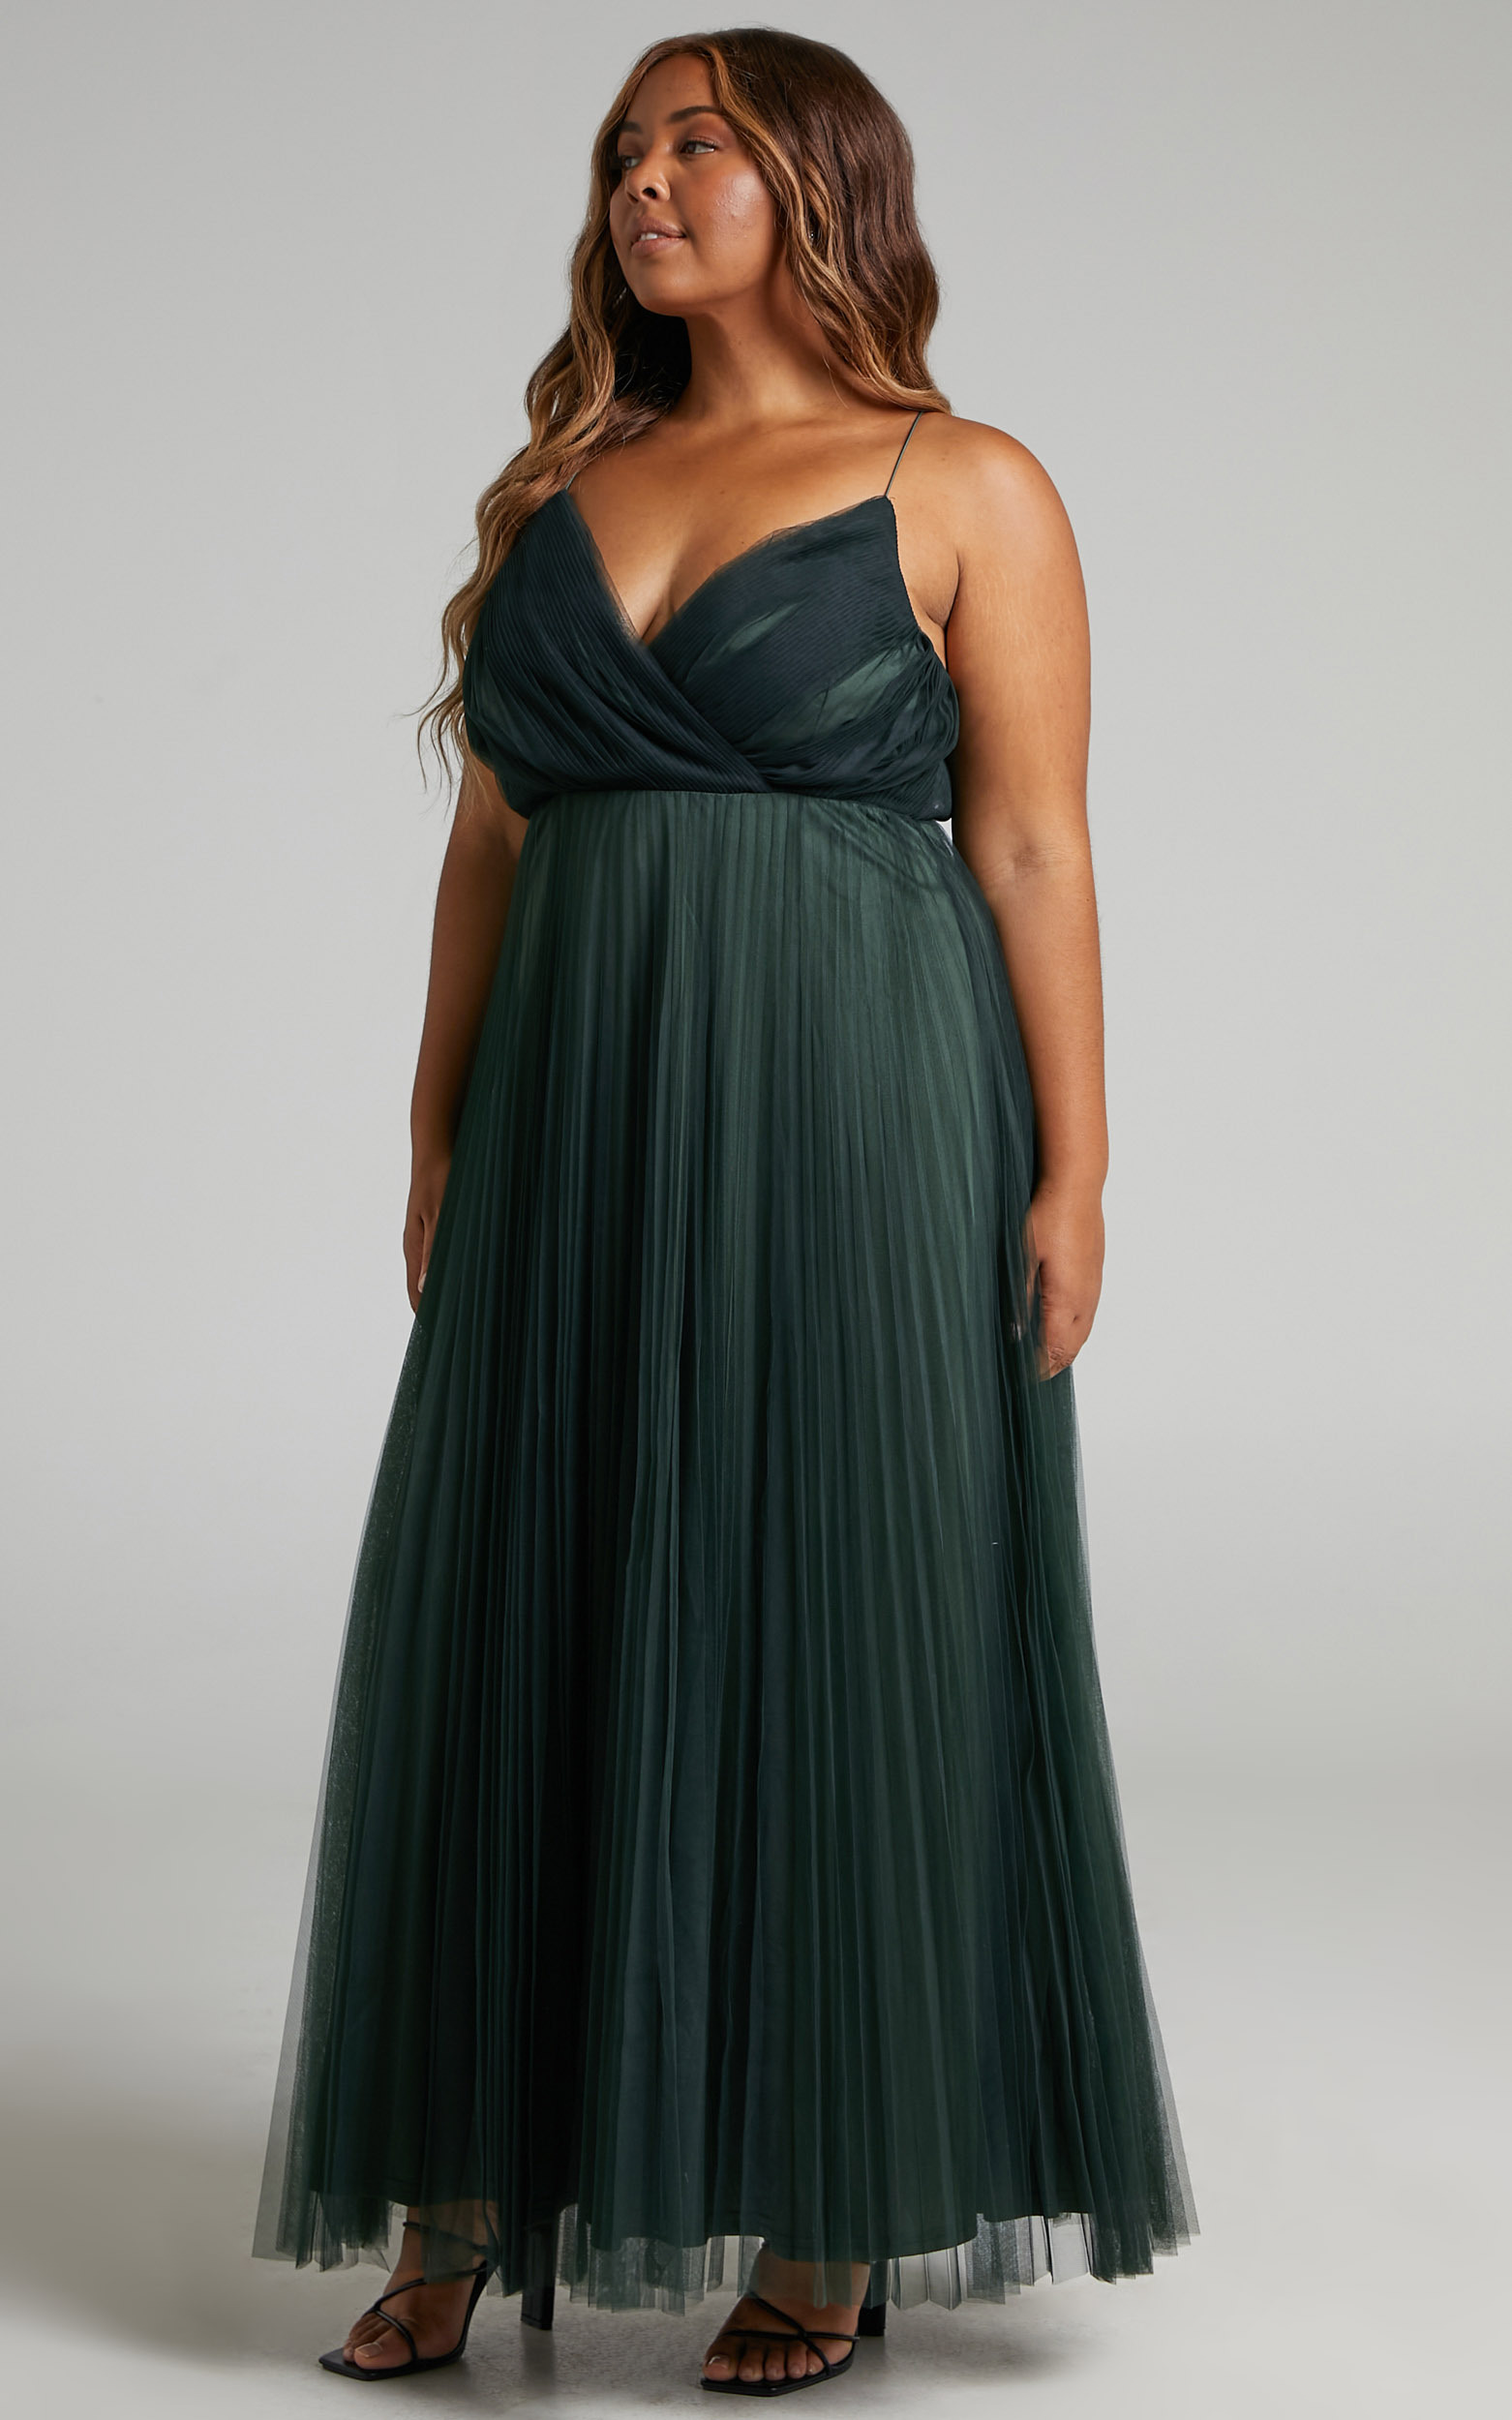 Allany Pleated Tulle Maxi Dress in Emerald - 04, GRN1, hi-res image number null